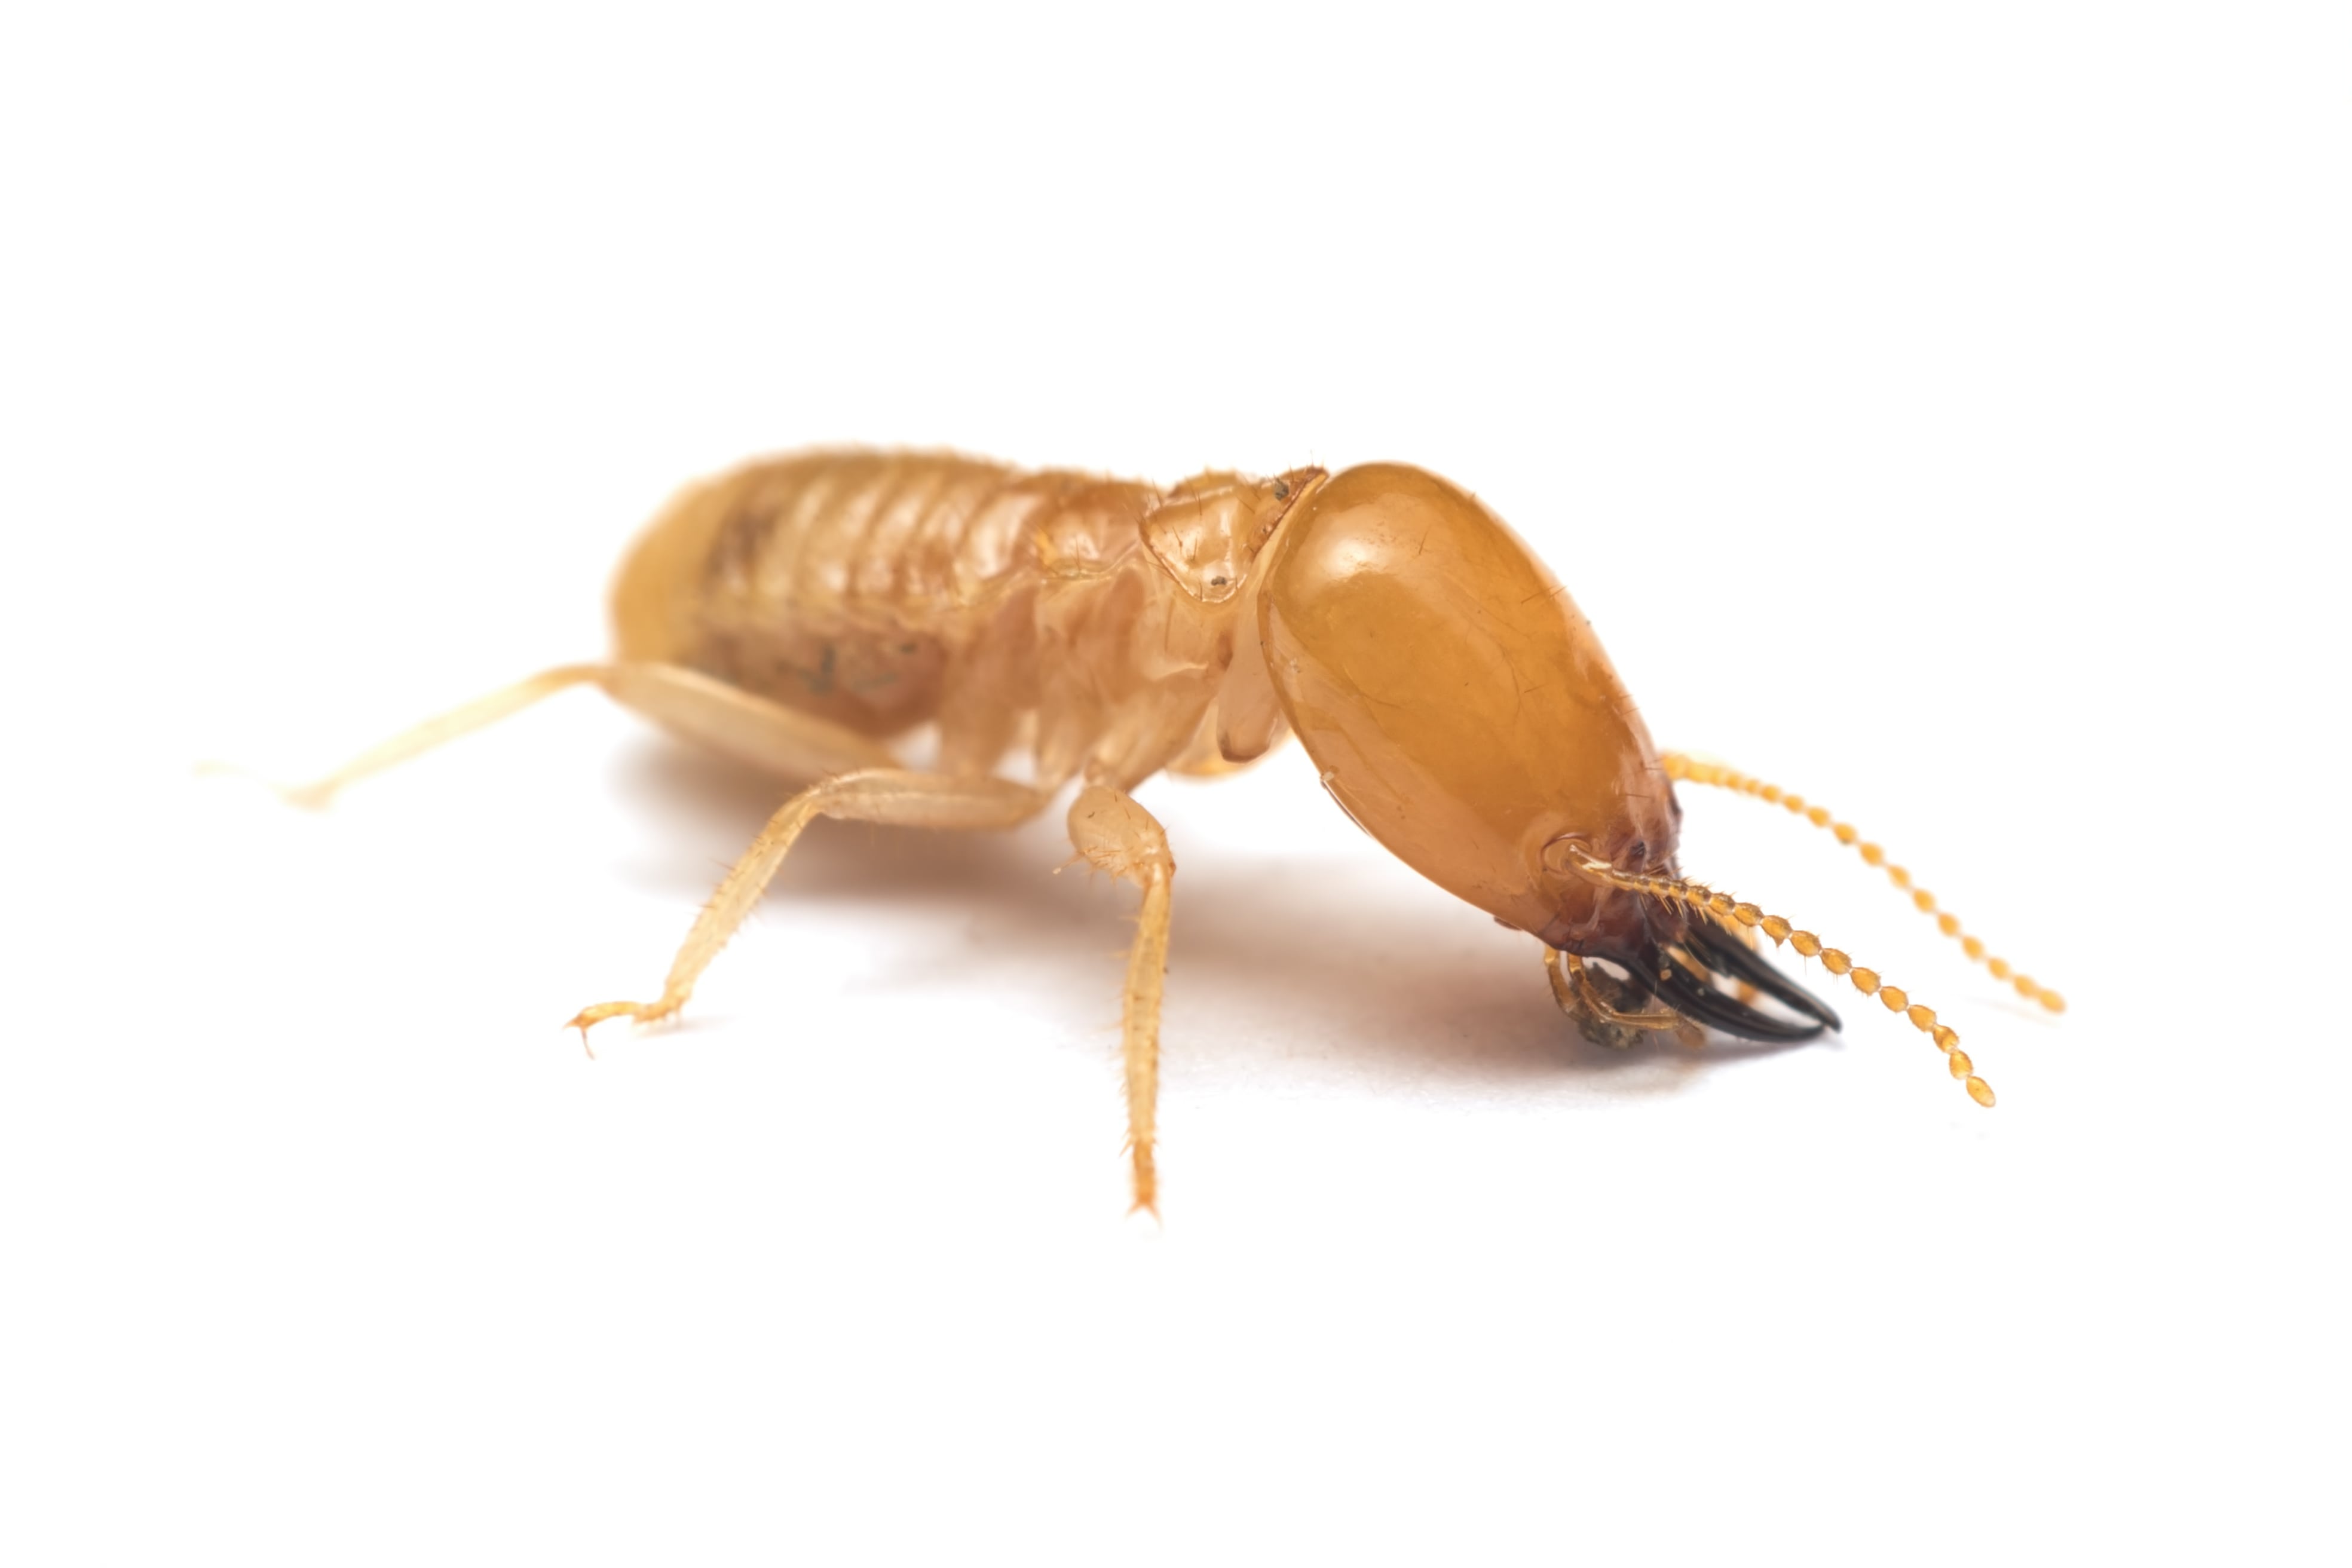 Soldier termite on white background - Holder's Pest Solutions